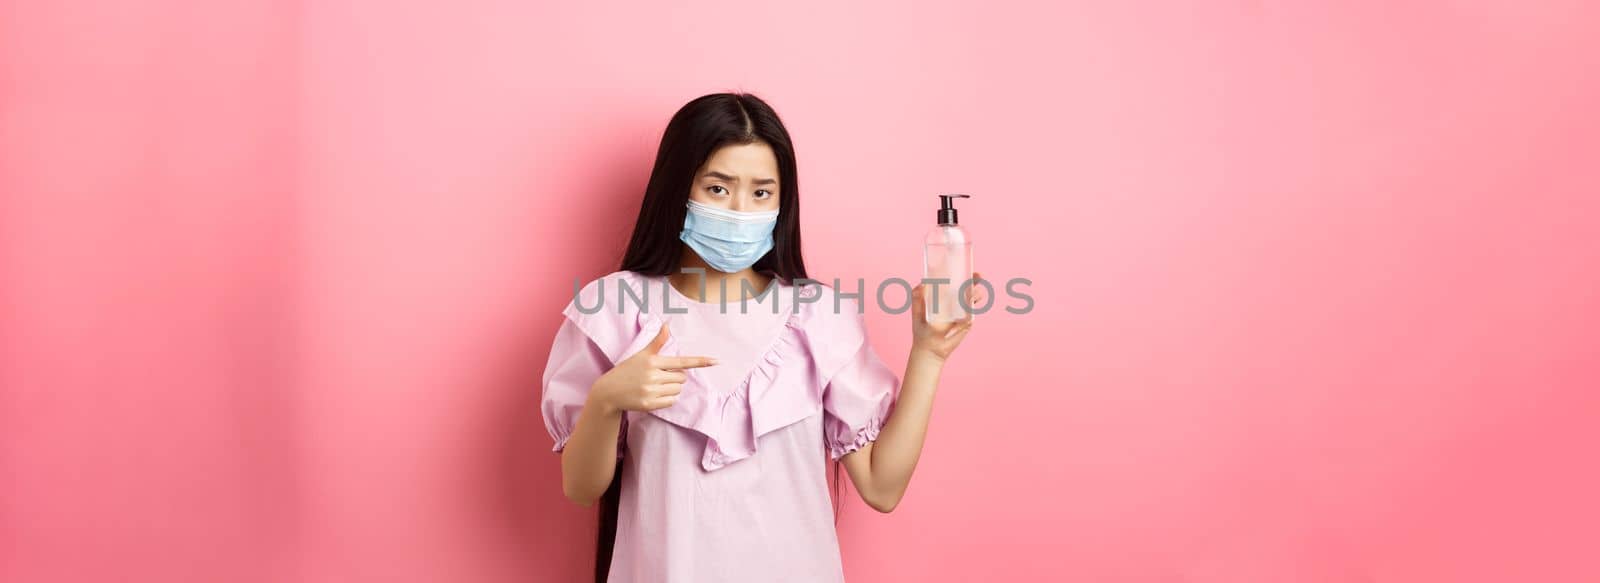 Healthy people and covid-19 pandemic concept. Skeptical asian woman frowning, wearing face mask, pointing at bottle of hand sanitizer, standing against pink background.